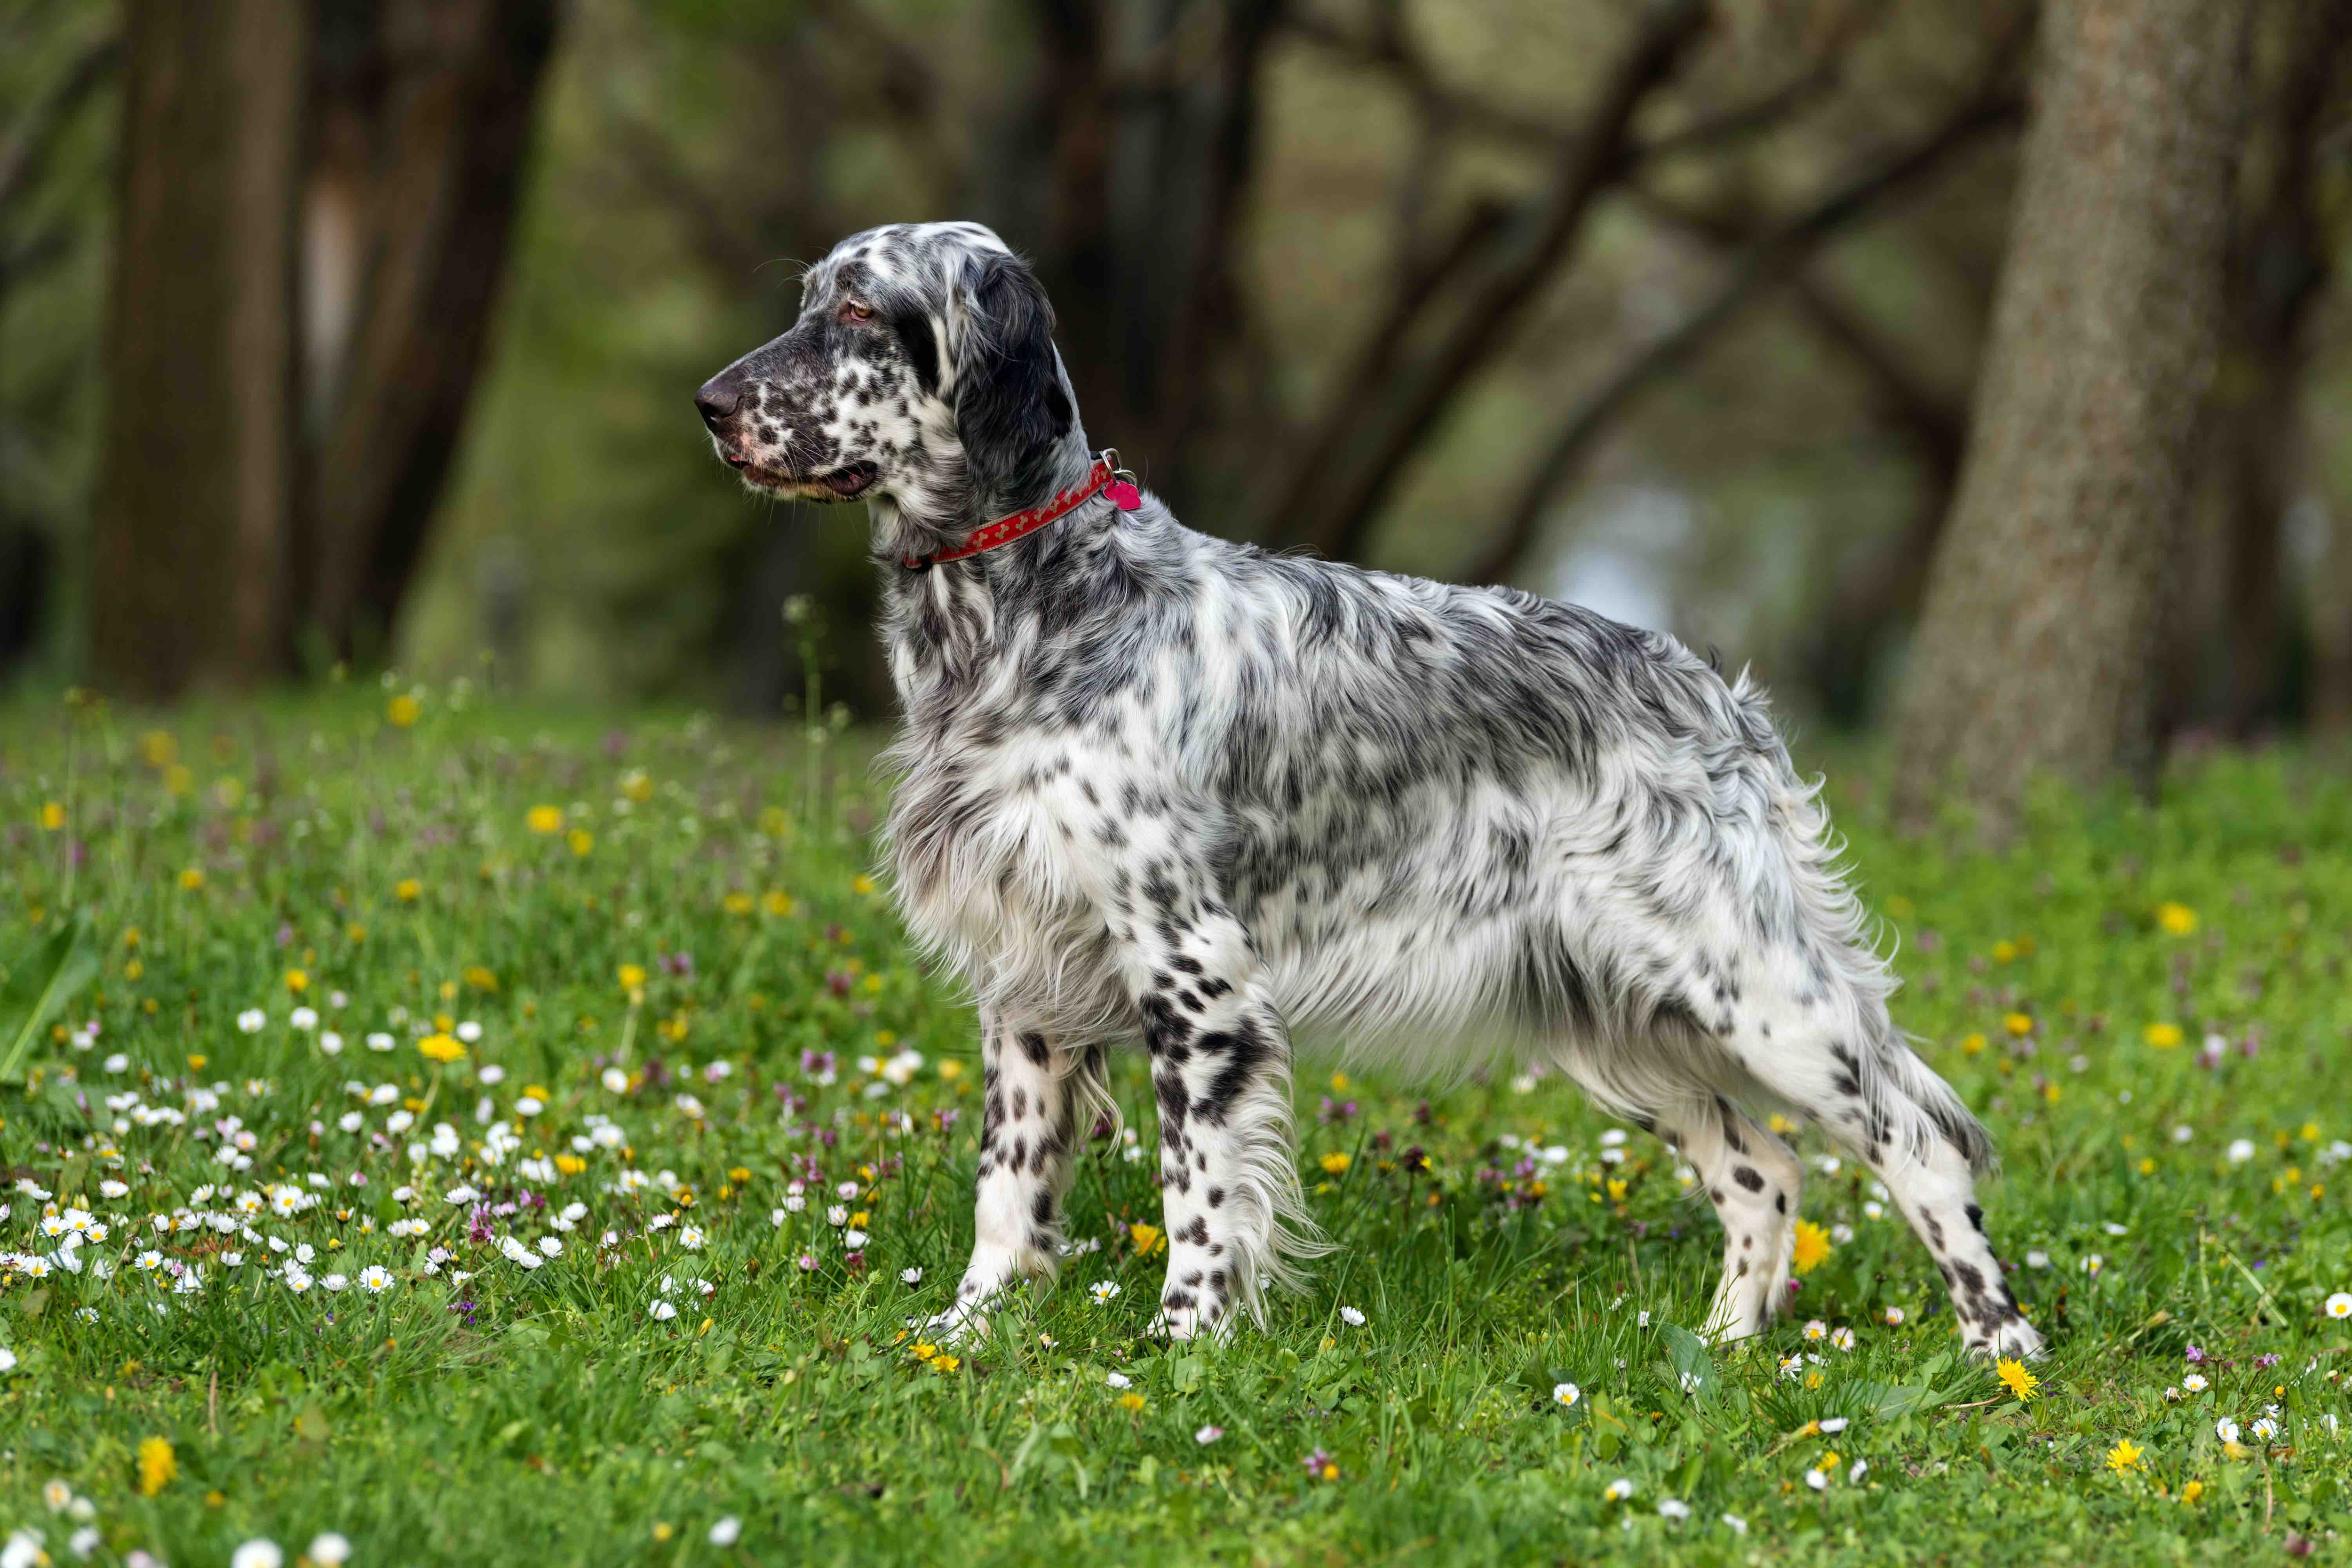 white and black speckled english setter standing outside